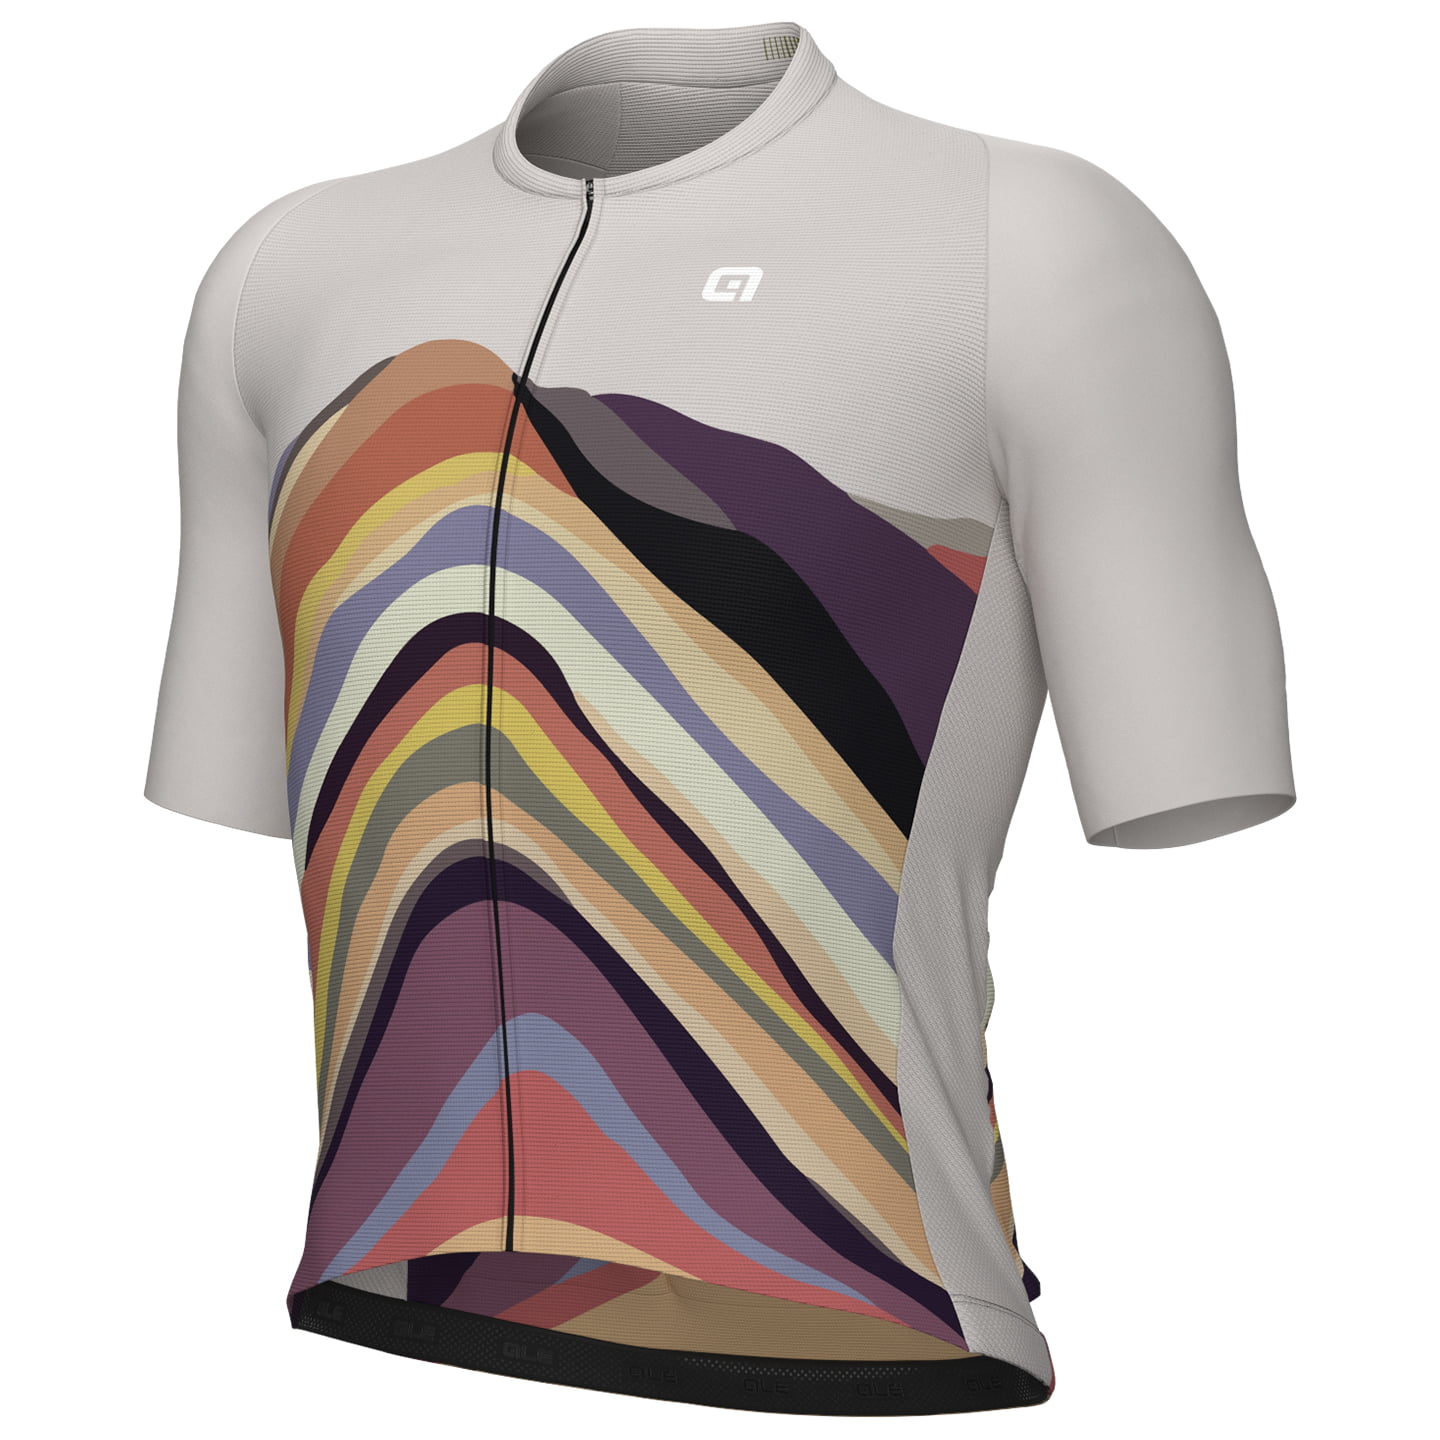 ALE Rainbow Short Sleeve Jersey, for men, size L, Cycling jersey, Cycling clothing